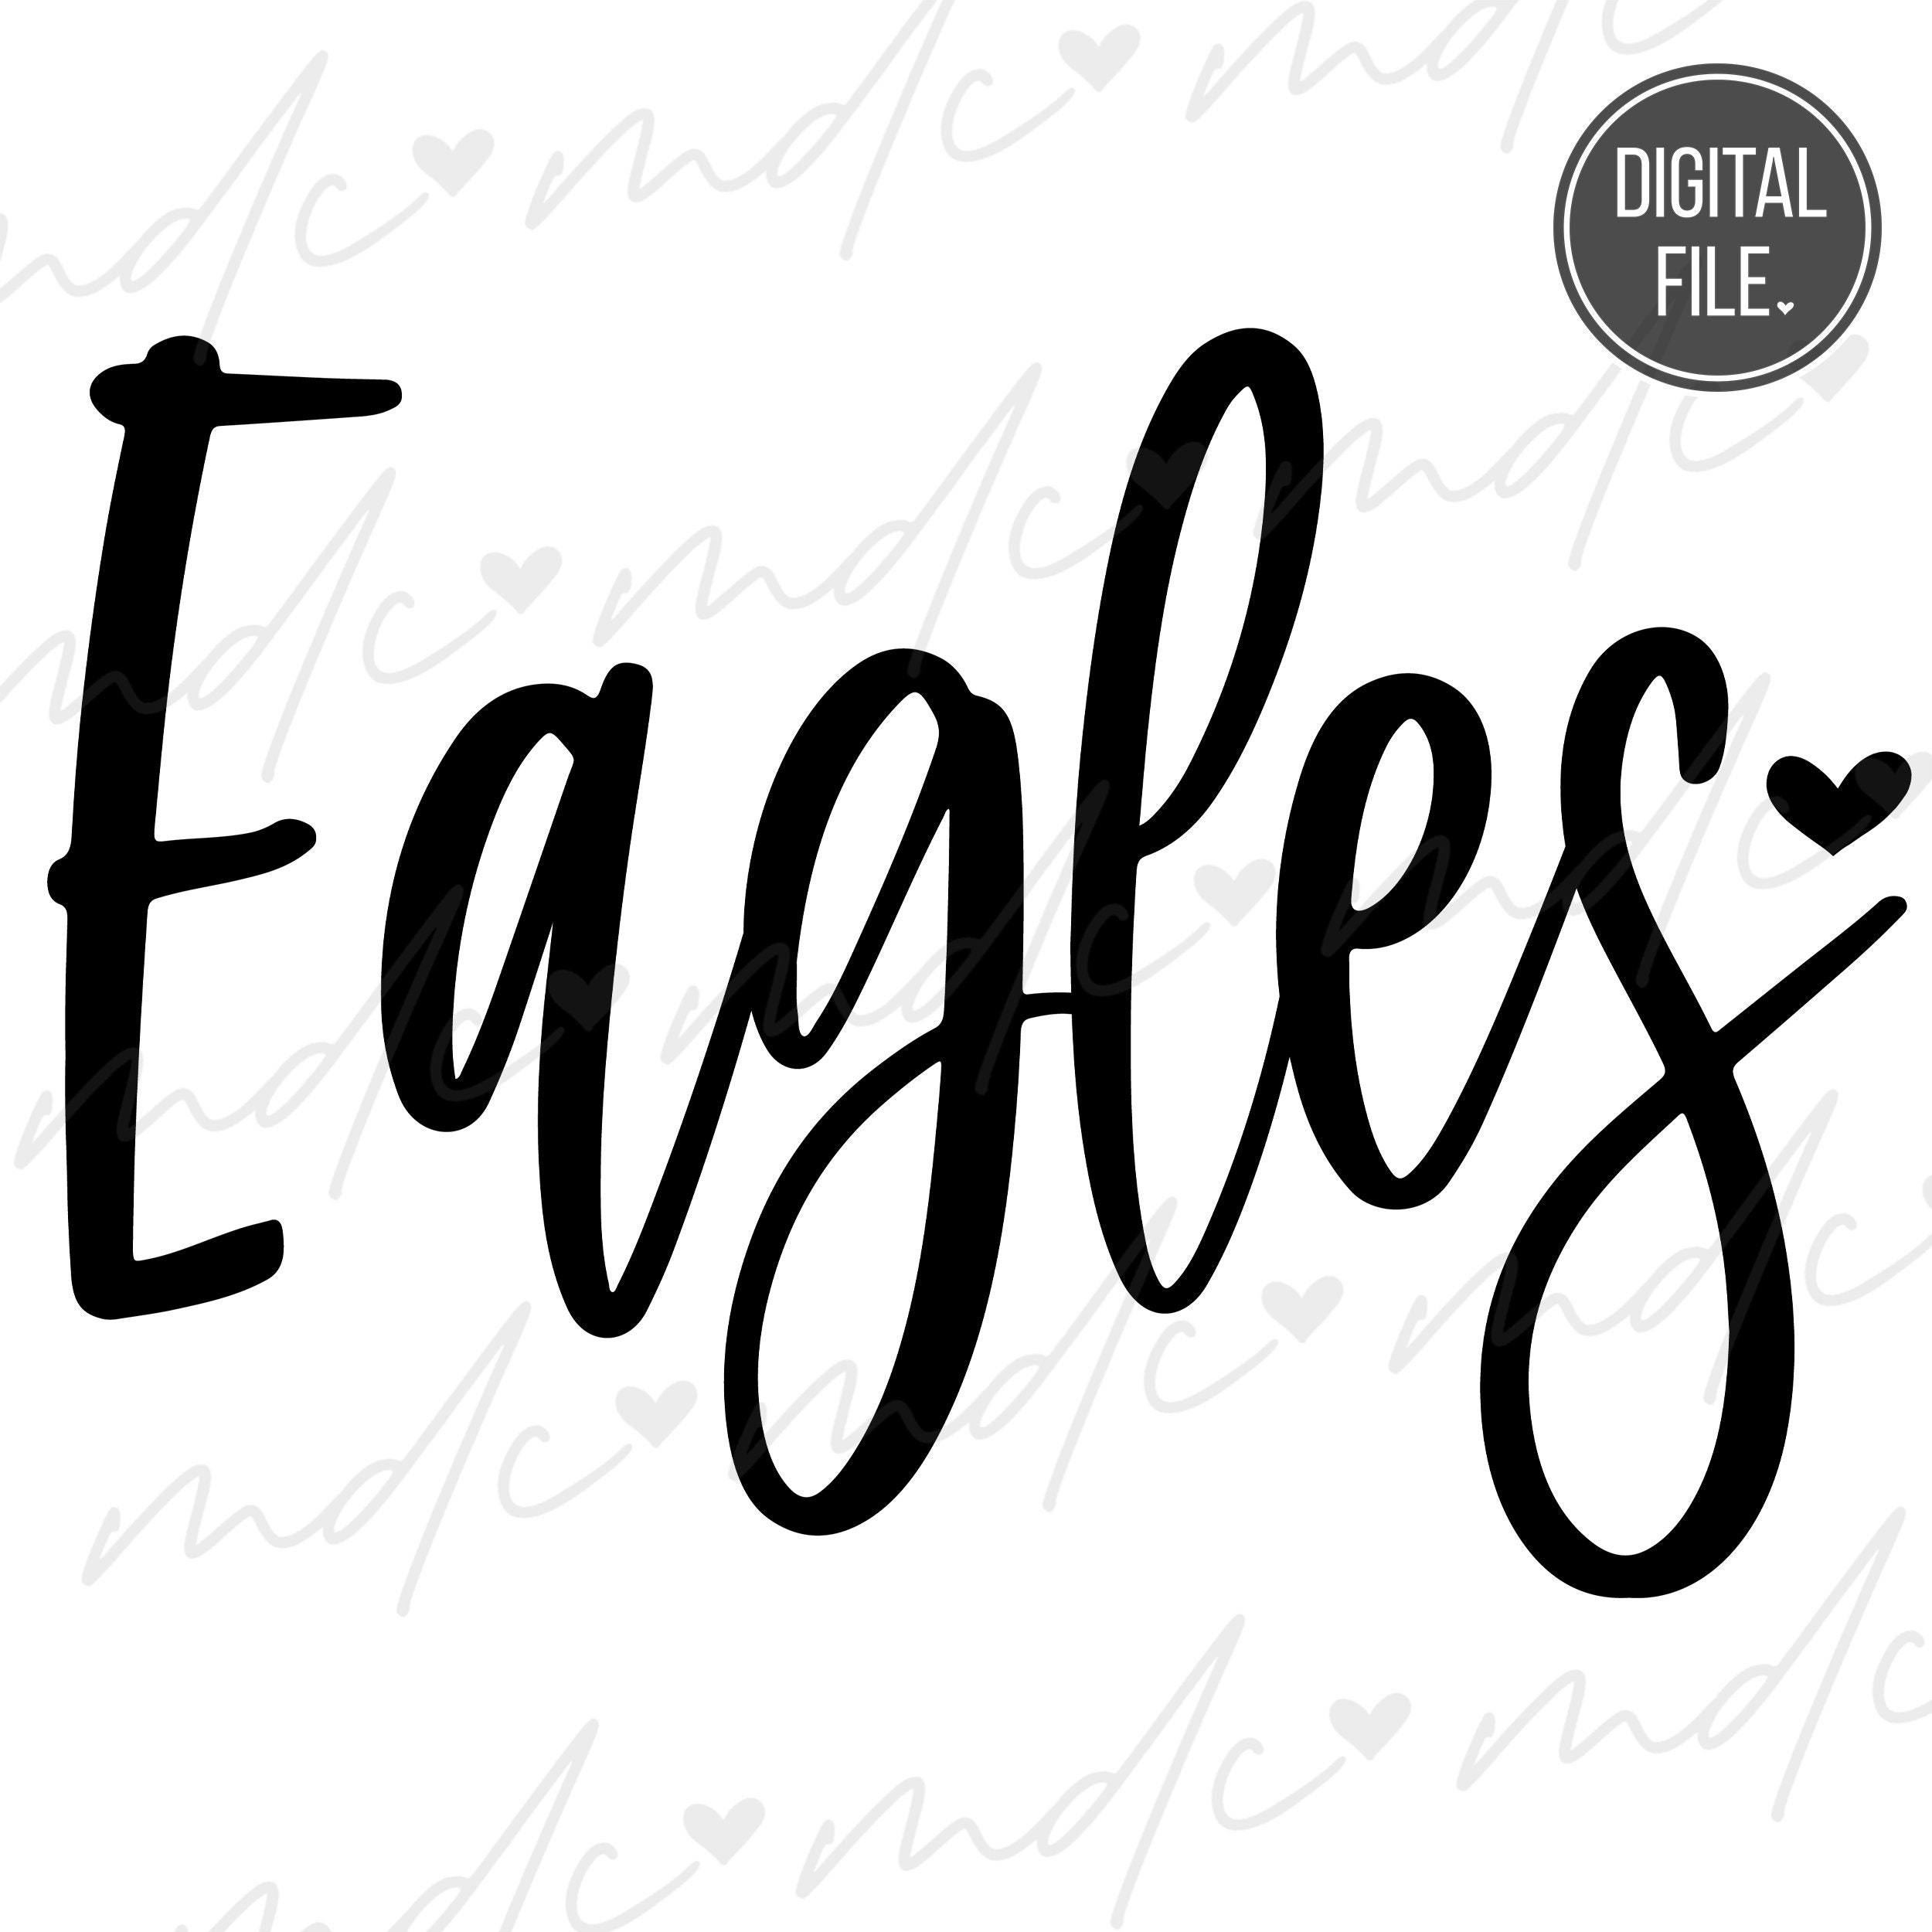 his and hers SVG Cut File his & hers PNG Hand Lettered Cursive Text Digital  download png eps svg vector clip art silhouette